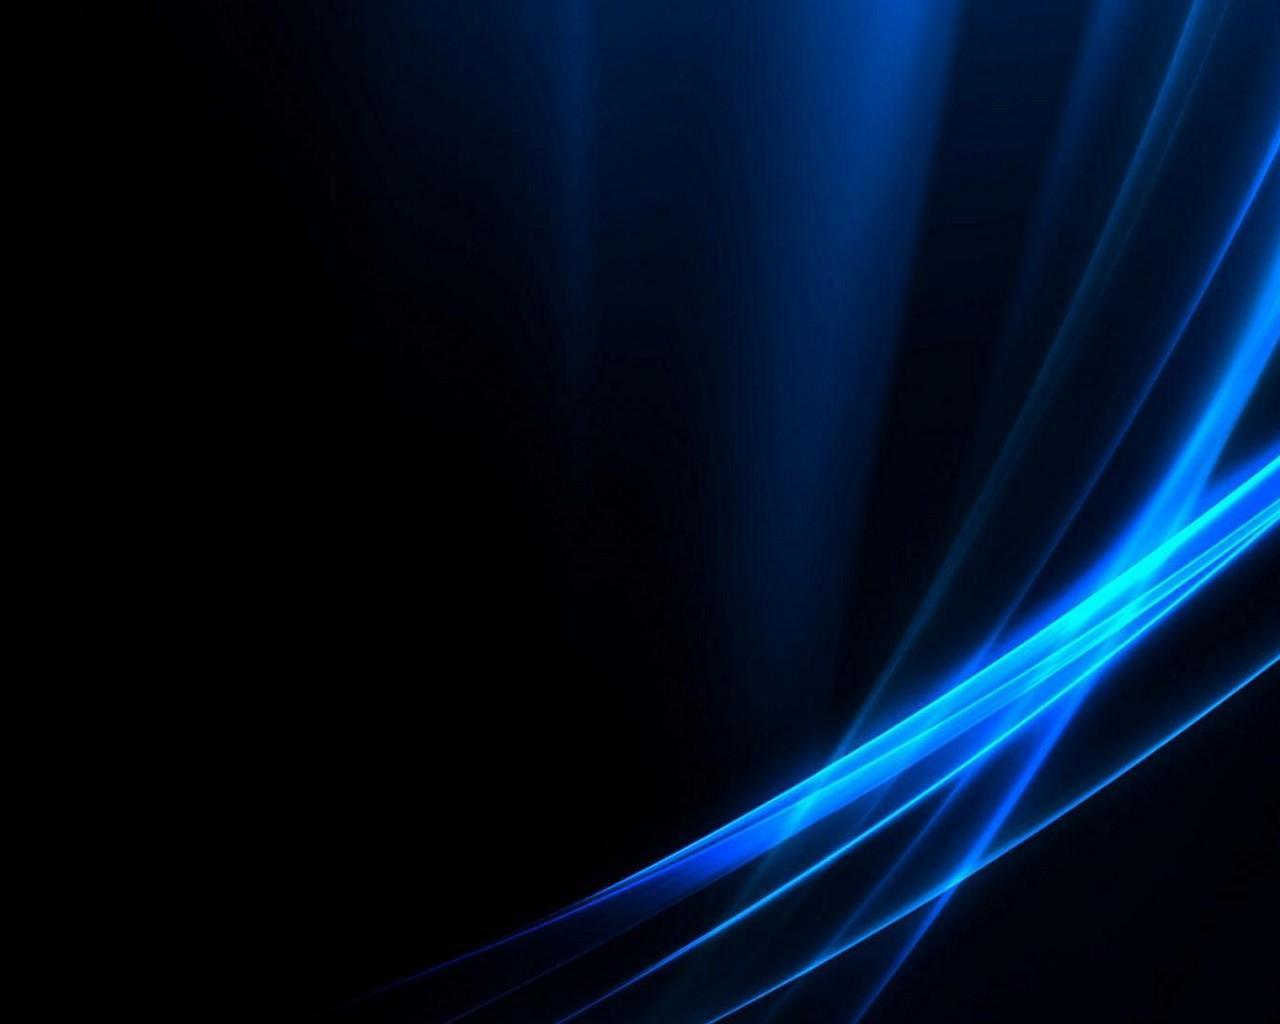 Motion Wallpapers Super AMOLED Wallpapers HD Theme para Android - APK